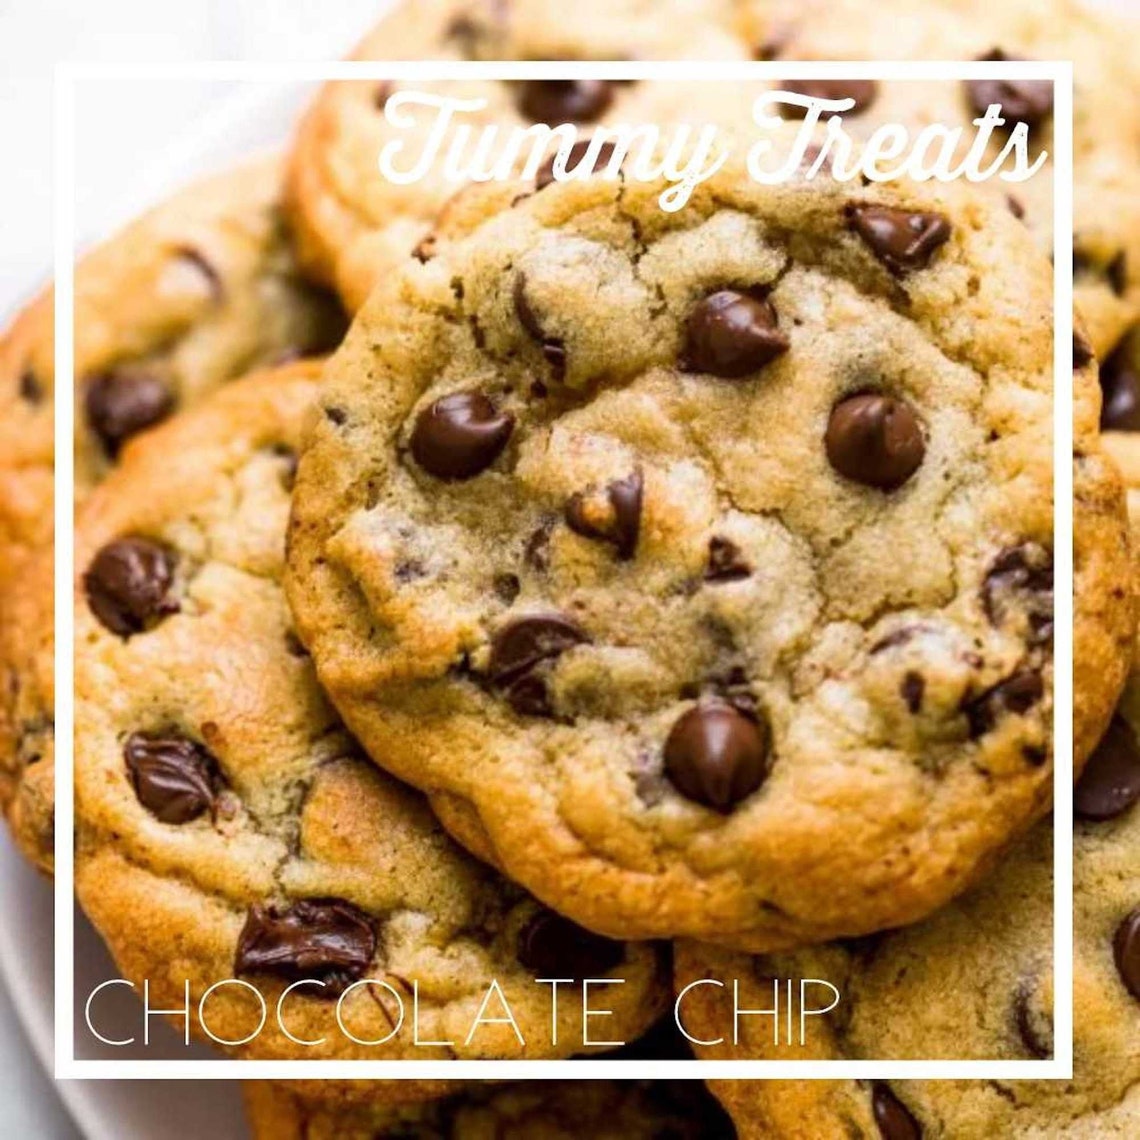 Large Homemade Chocolate Chip Cookies From Scratch | Etsy